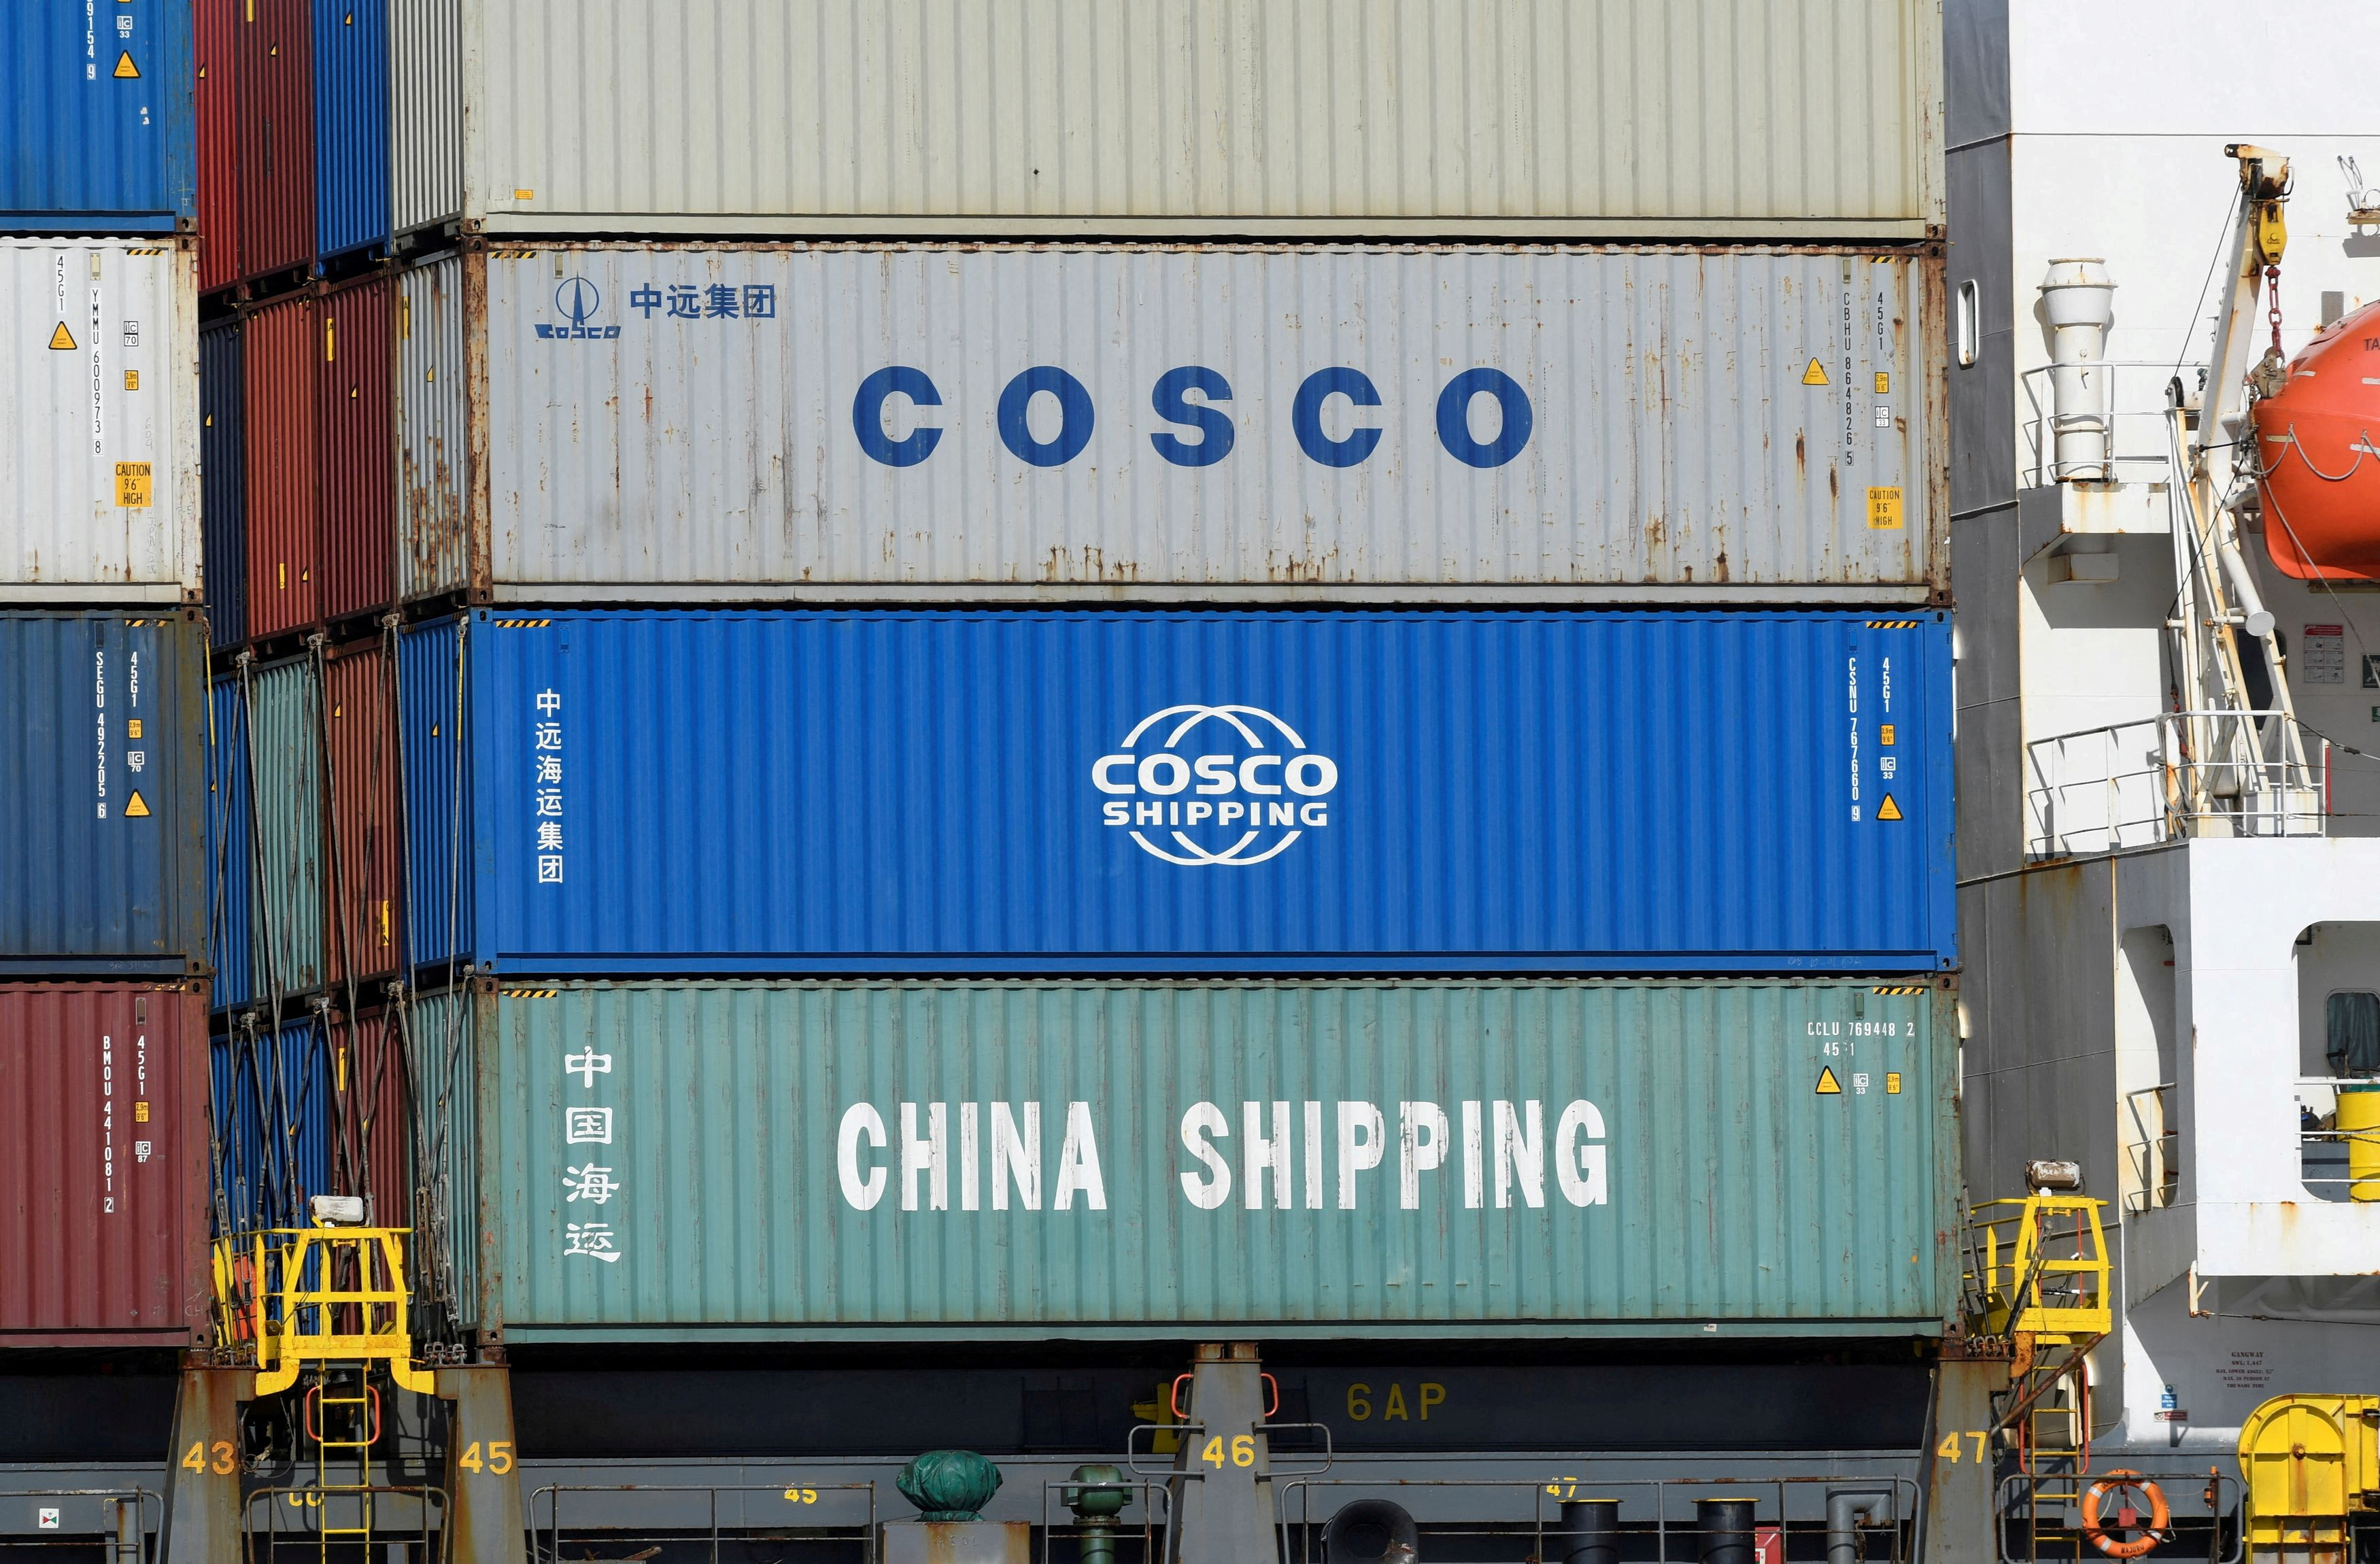 Containers of Chinese companies China Shipping and COSCO (China Ocean Shipping Company) are loaded on a container as it is leaving the port in Hamburg